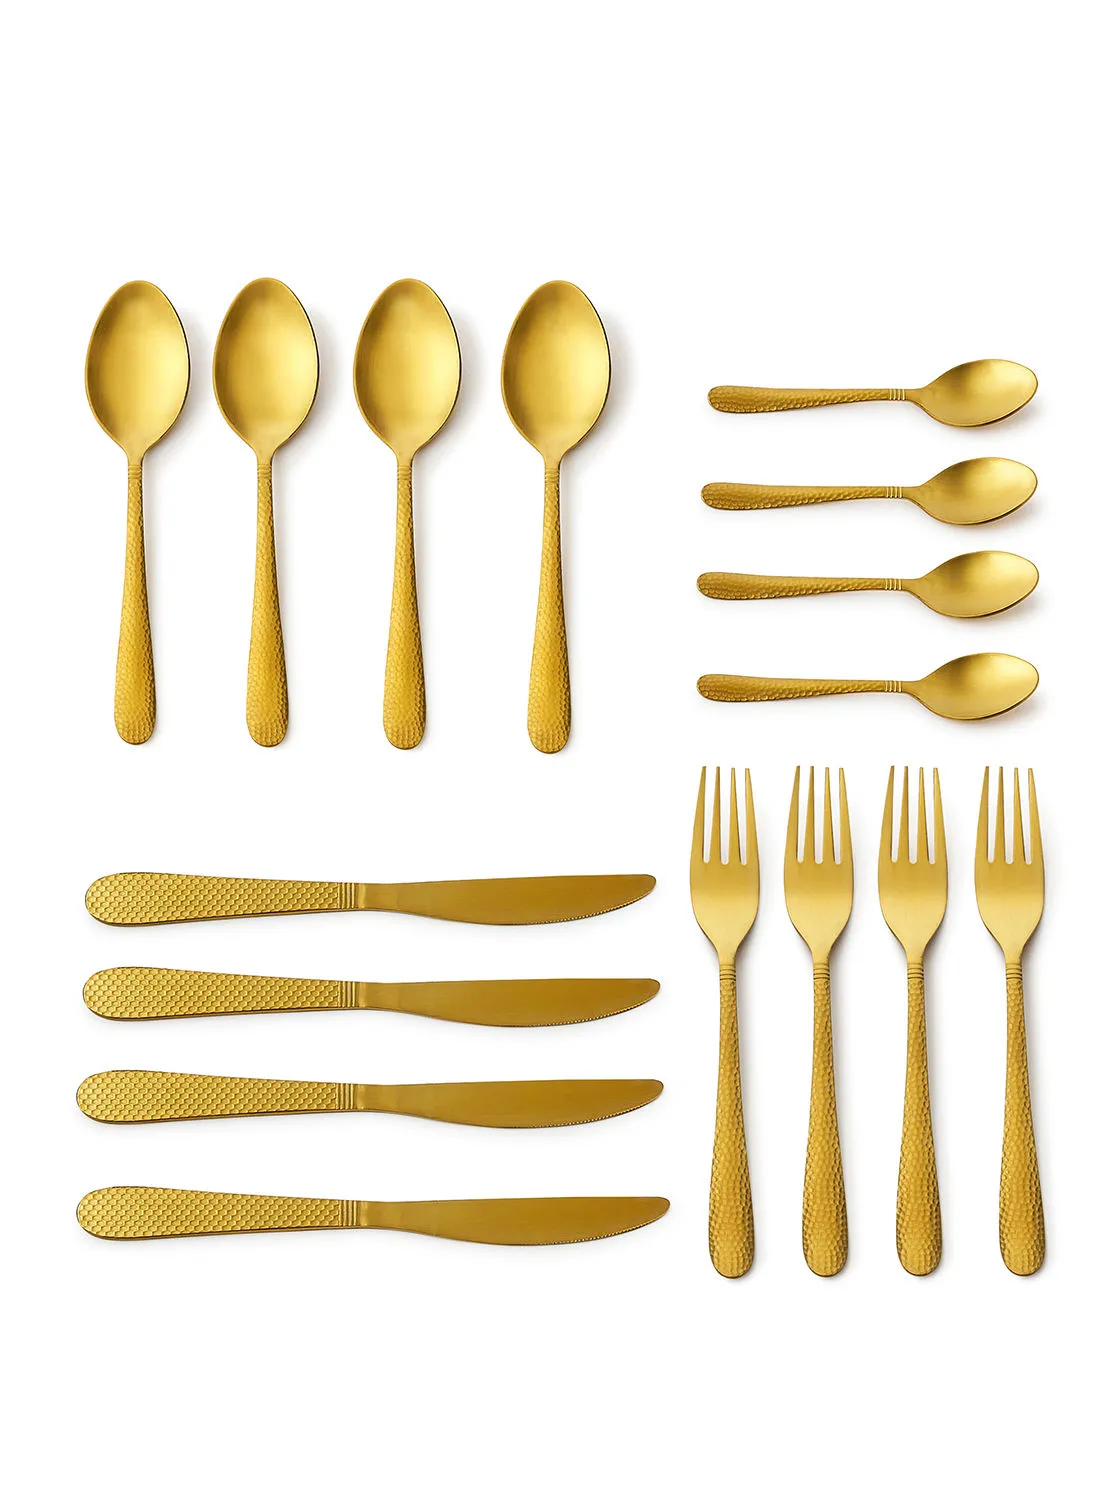 Amal 16 Piece Cutlery Set - Made Of Stainless Steel - Silverware Flatware - Spoons And Forks Set, Spoon Set - Table Spoons, Tea Spoons, Forks, Knives - Serves 4 - Design Gold Aster